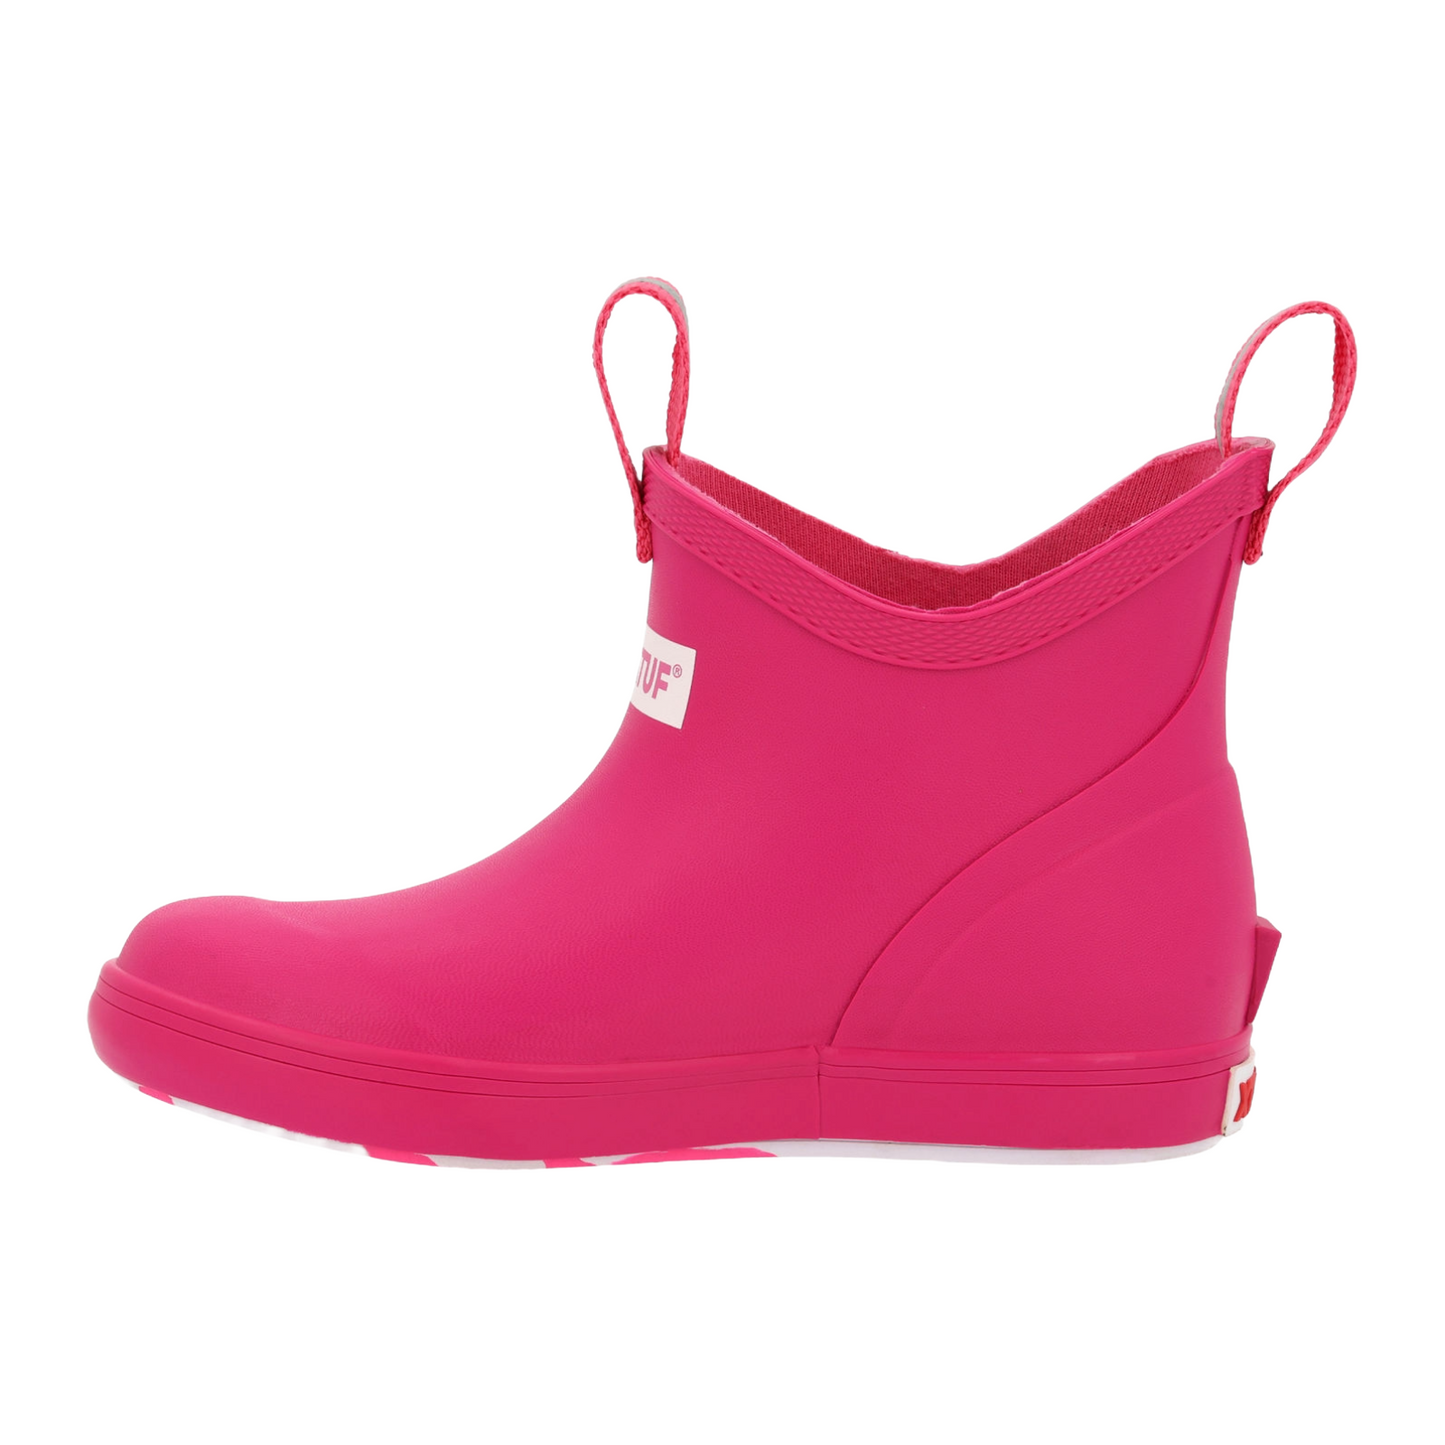 XTRATUF Girl's Neon Pink Slip On Ankle Deck Boots XKAB451Y